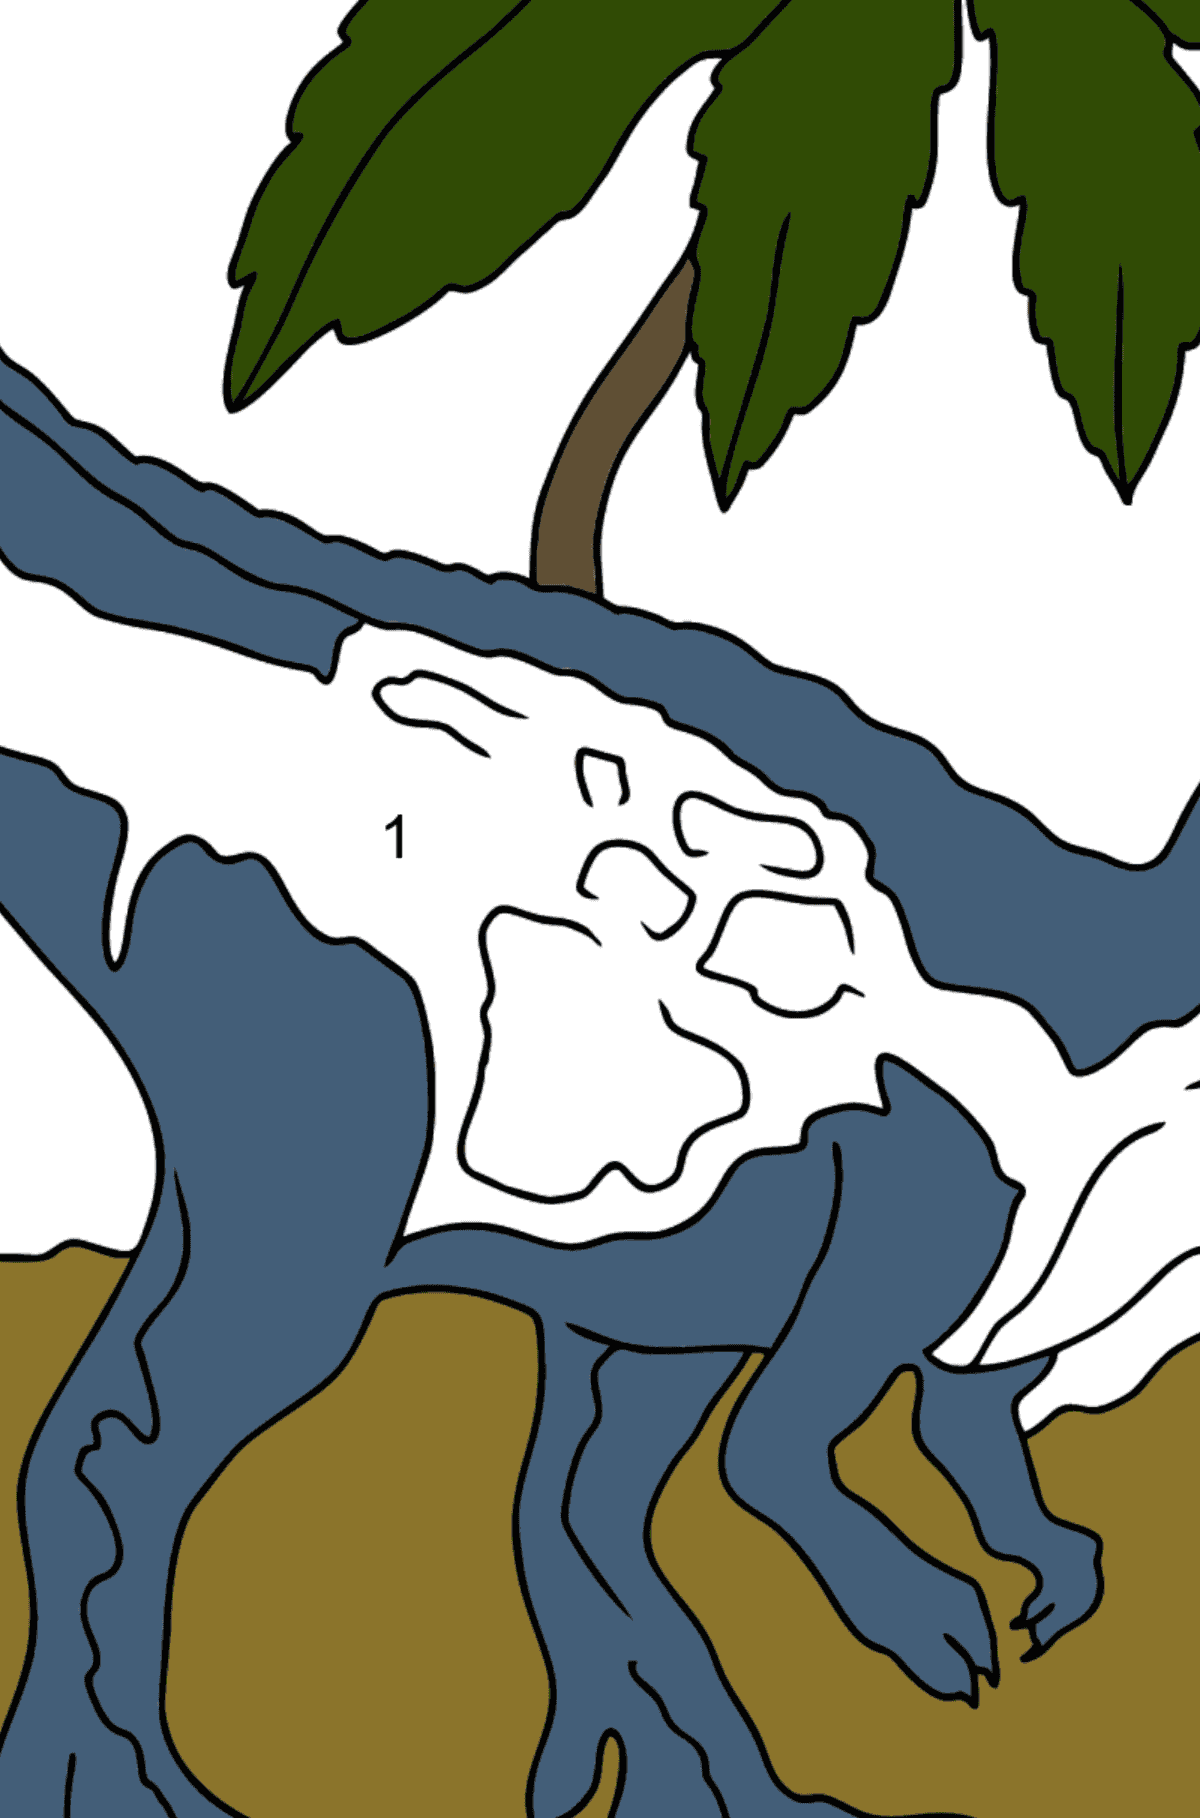 Coloring Page - Tyrannosaurus - The Best Hunter Among Dinosaurs - Coloring by Numbers for Kids